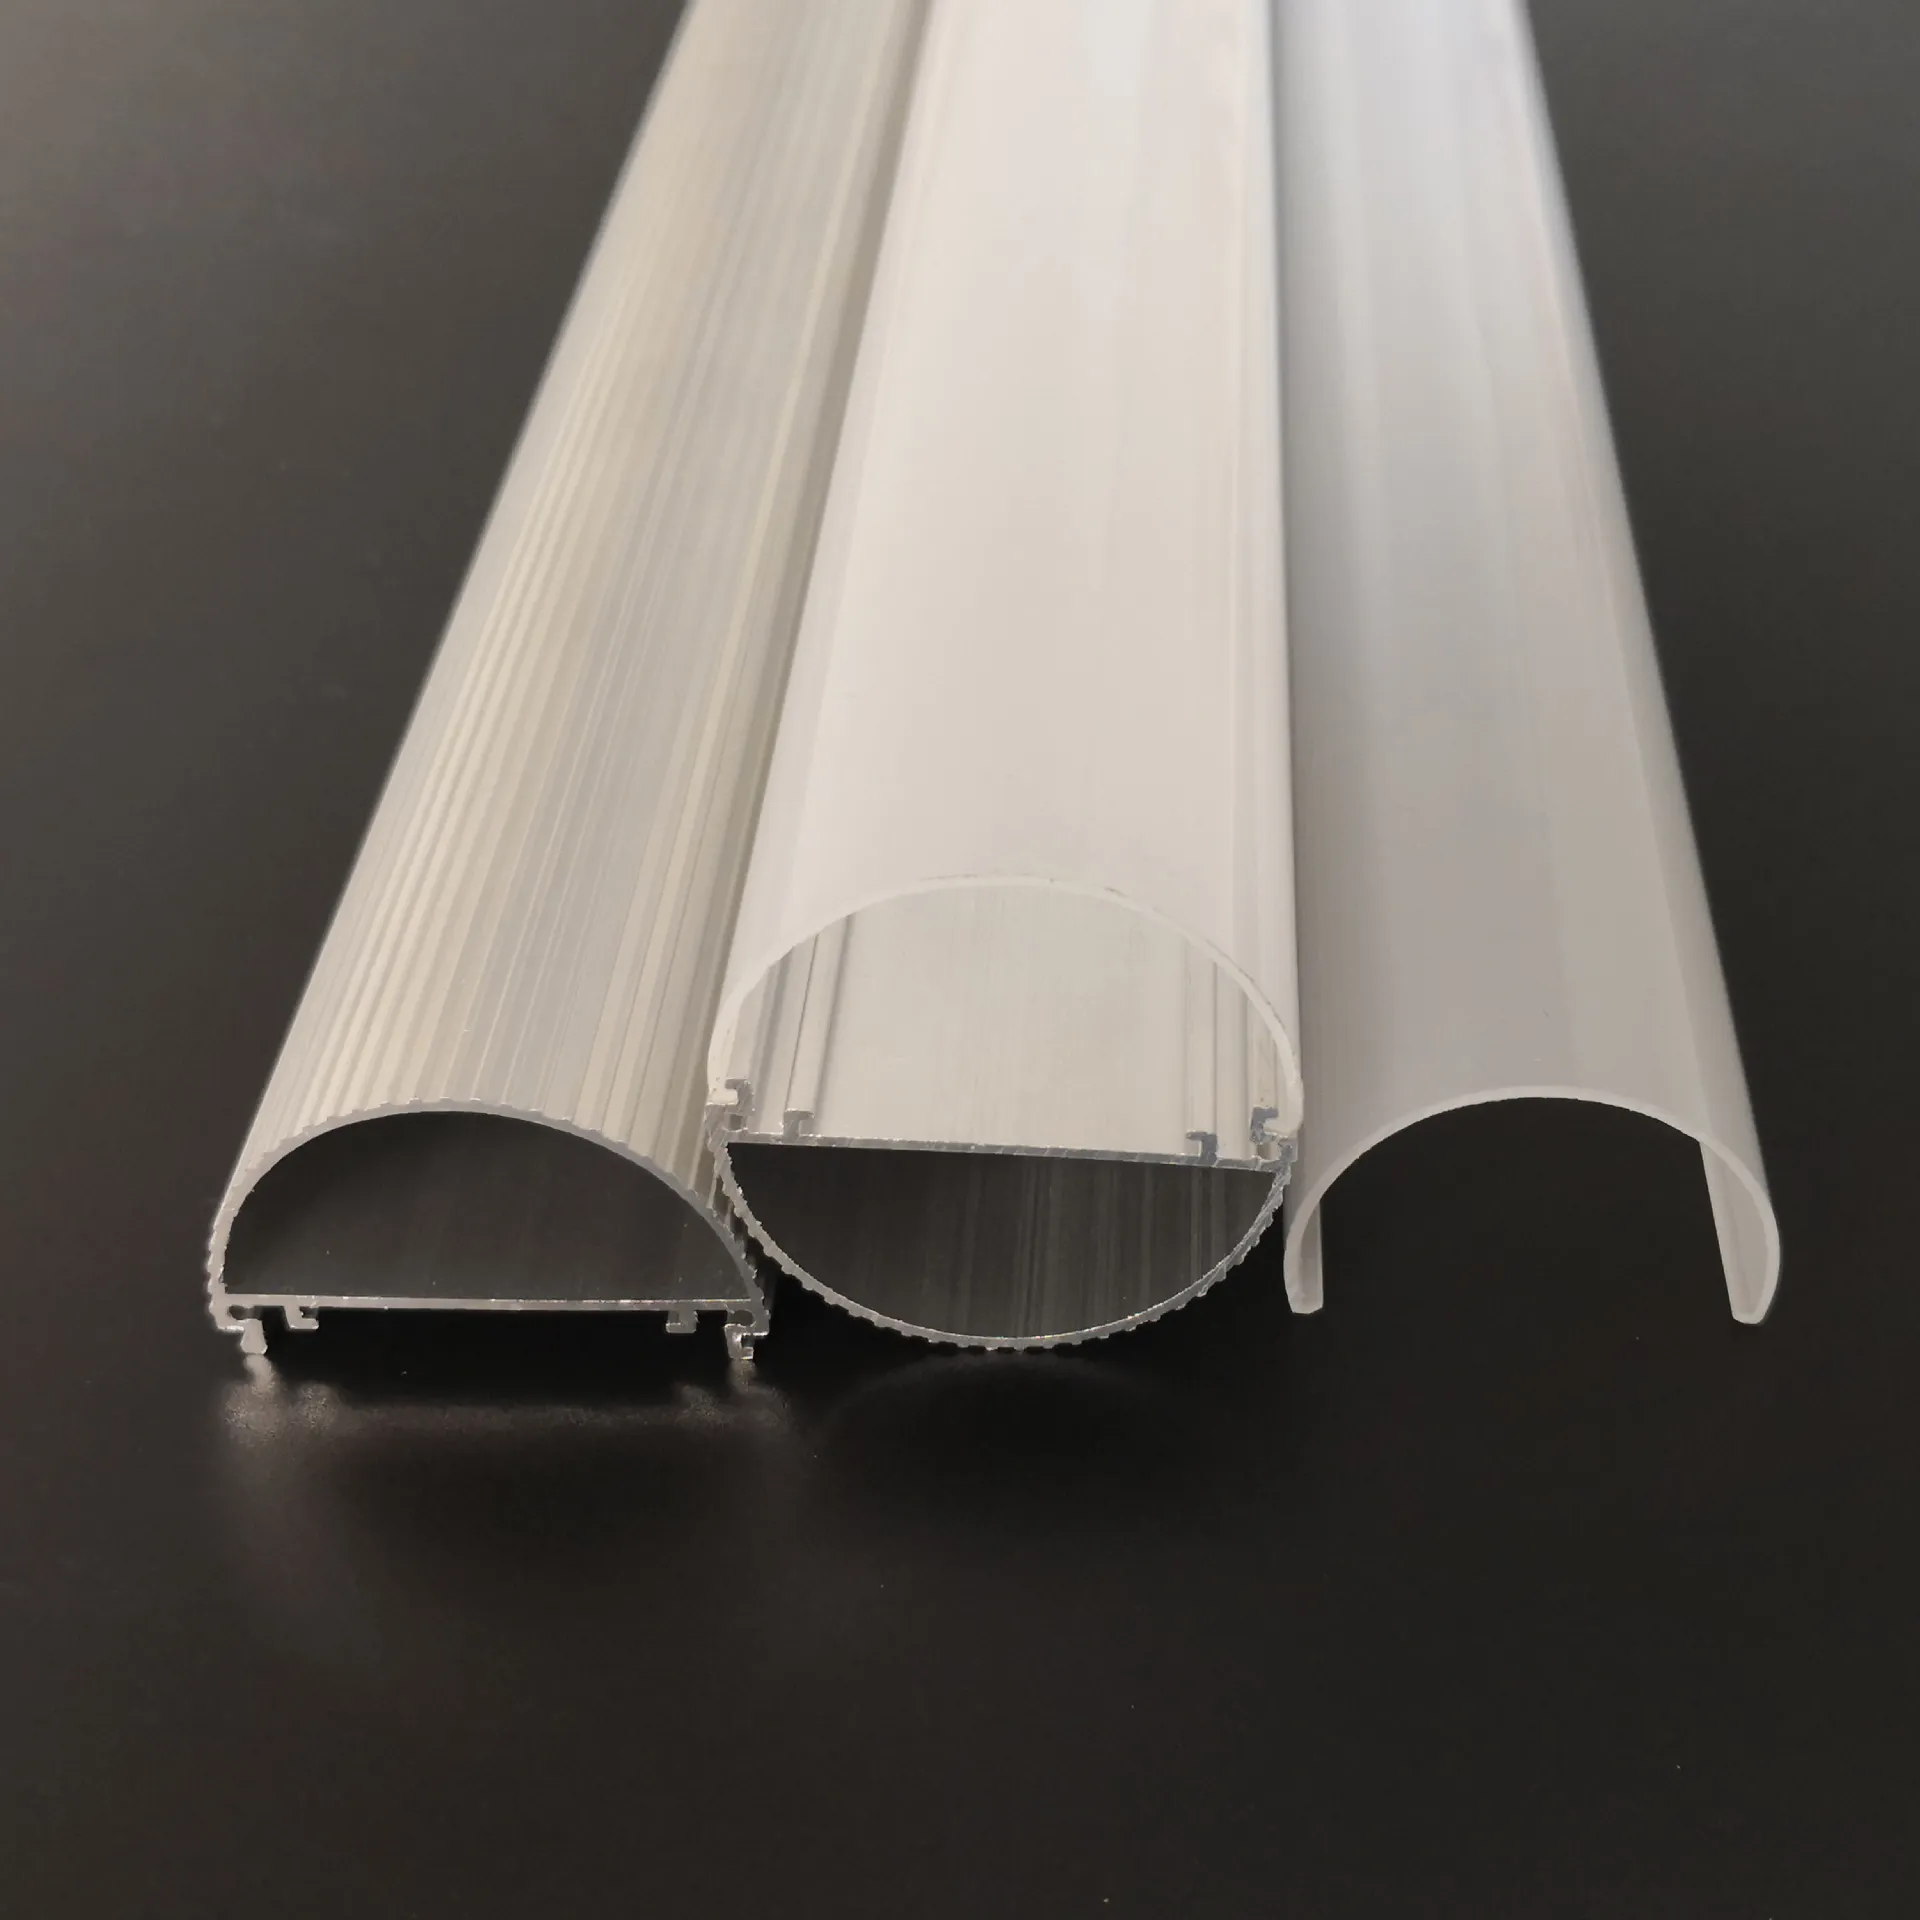 Application suggestions for polycarbonate tubes